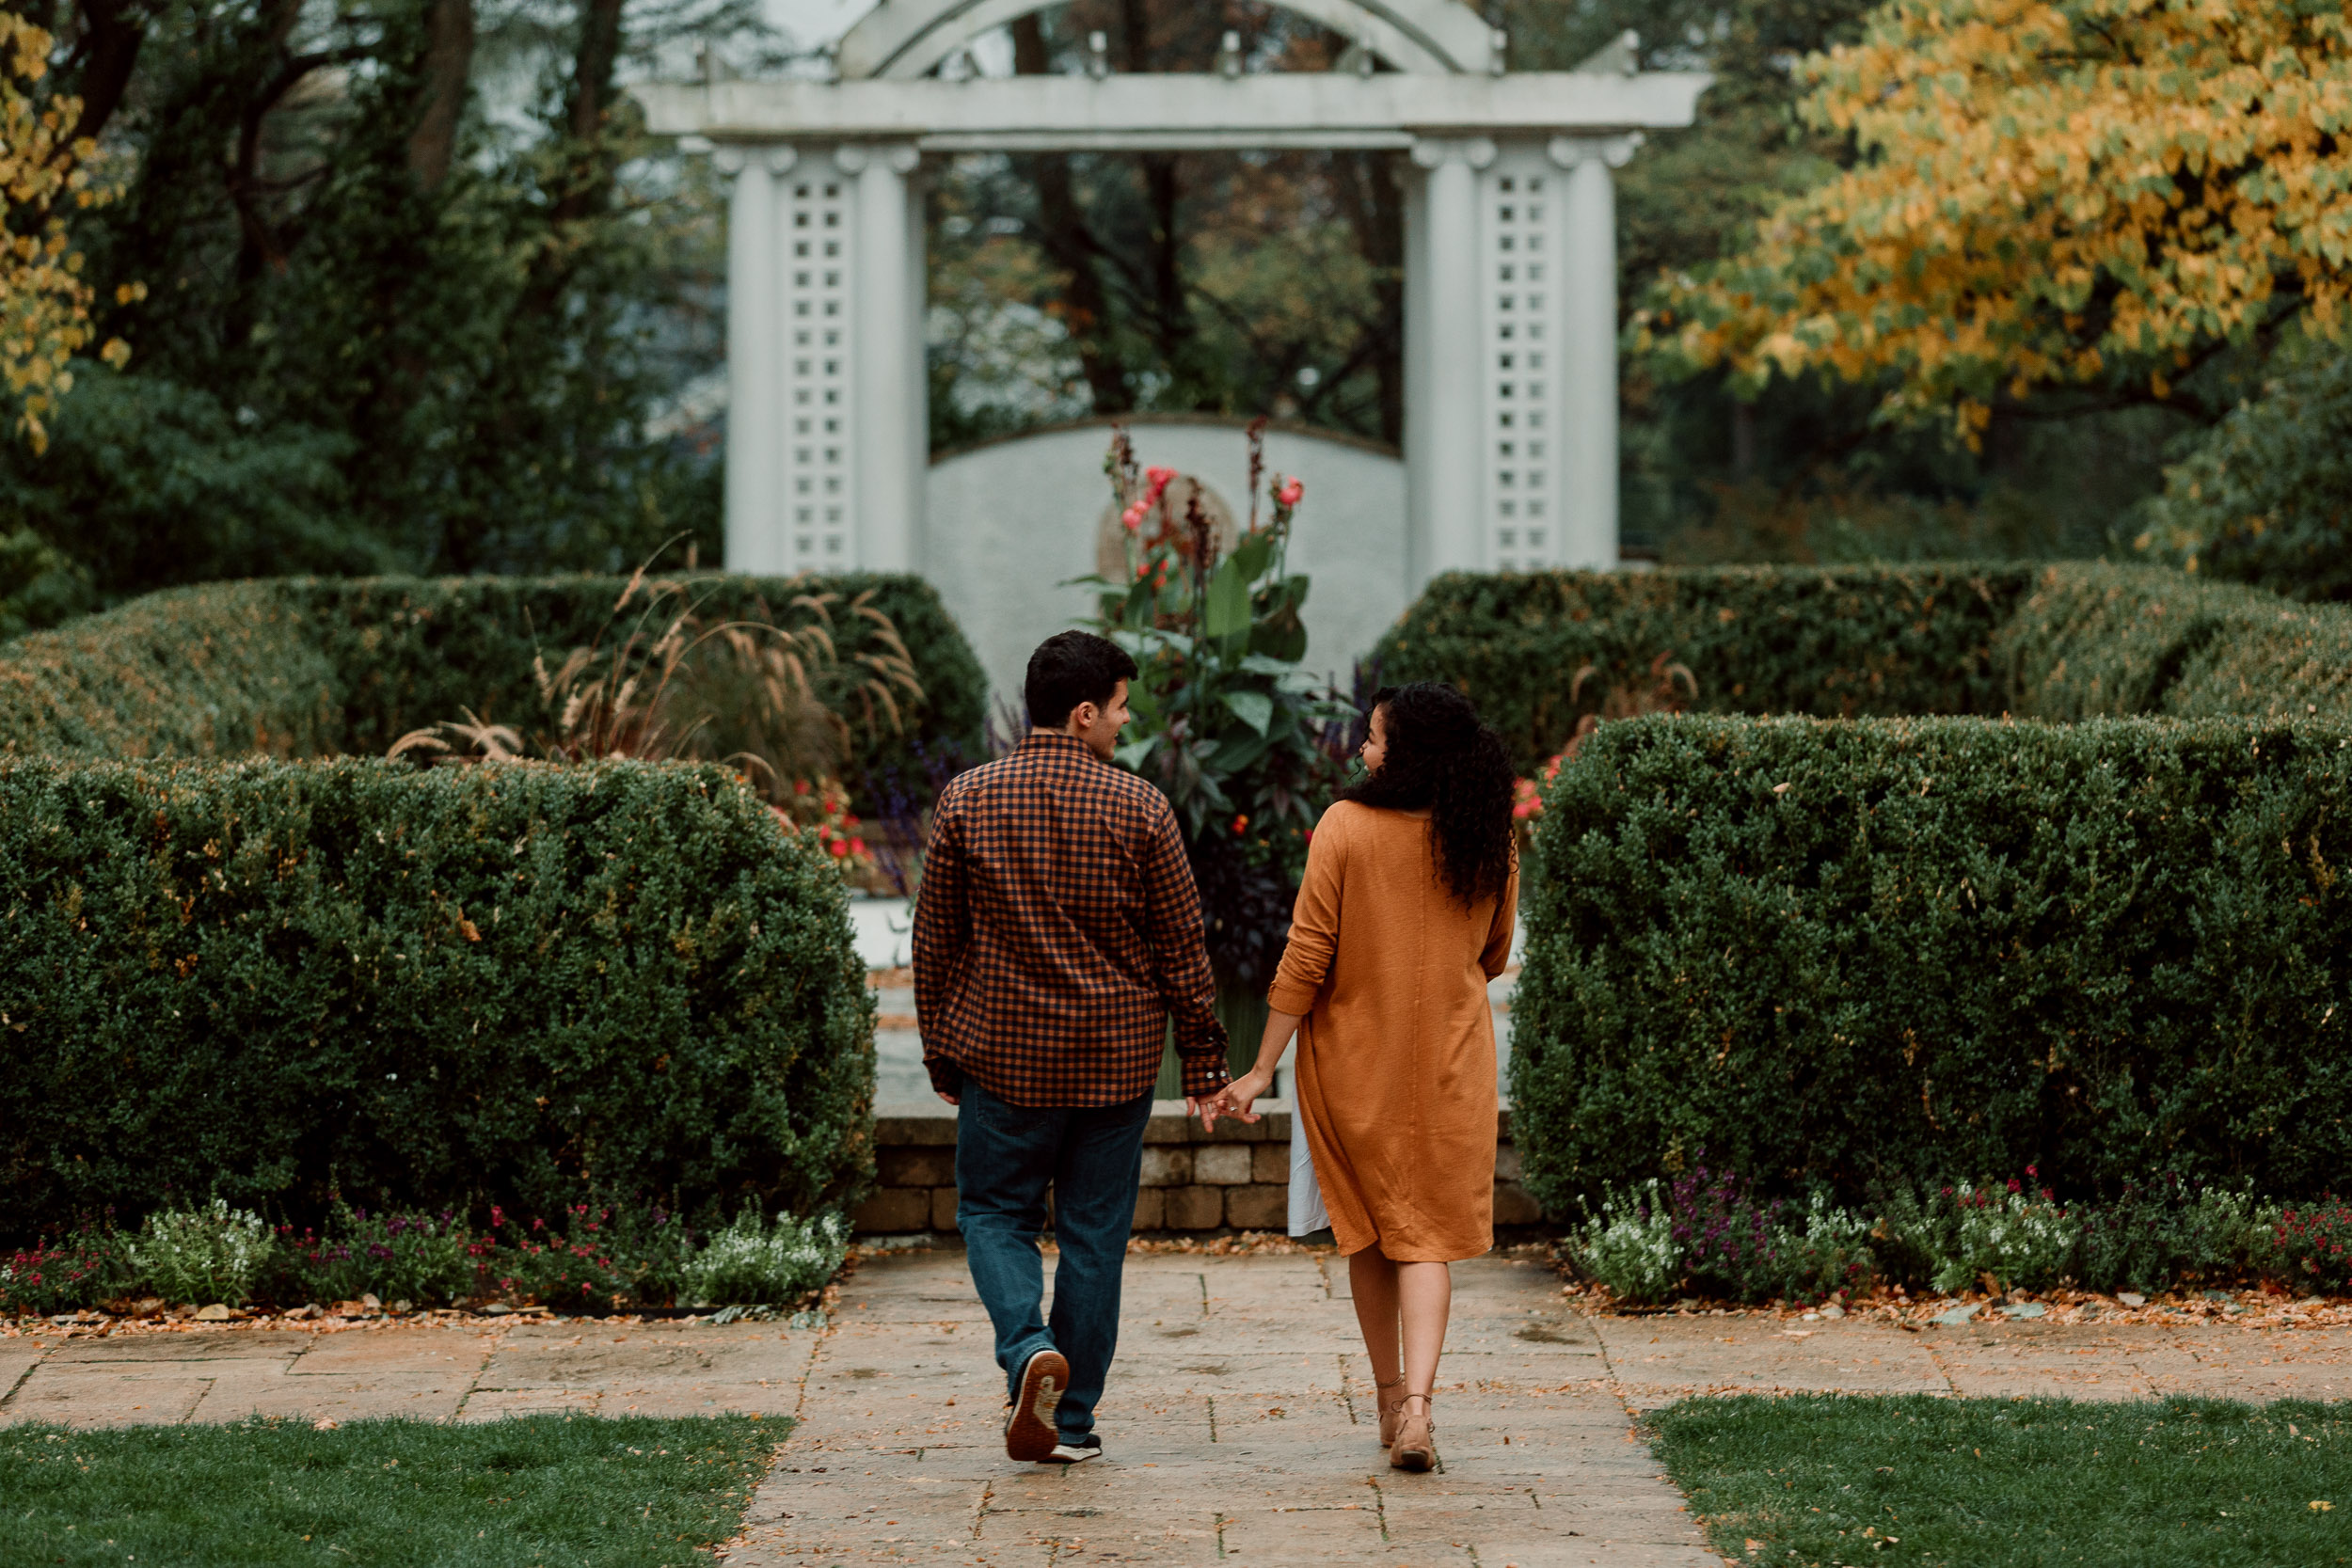 Rainy Day Engagement Photos | Fall Engagement Session Outfits | Sweet Couple in Chicago | Hurley Gardens Engagement Session | Chicago Engagement Photographer | Outdoor Engagement Photo Locations in Chicago | Engagement Photo Locations Chicago | Where to take Engagement Photos in Chicago